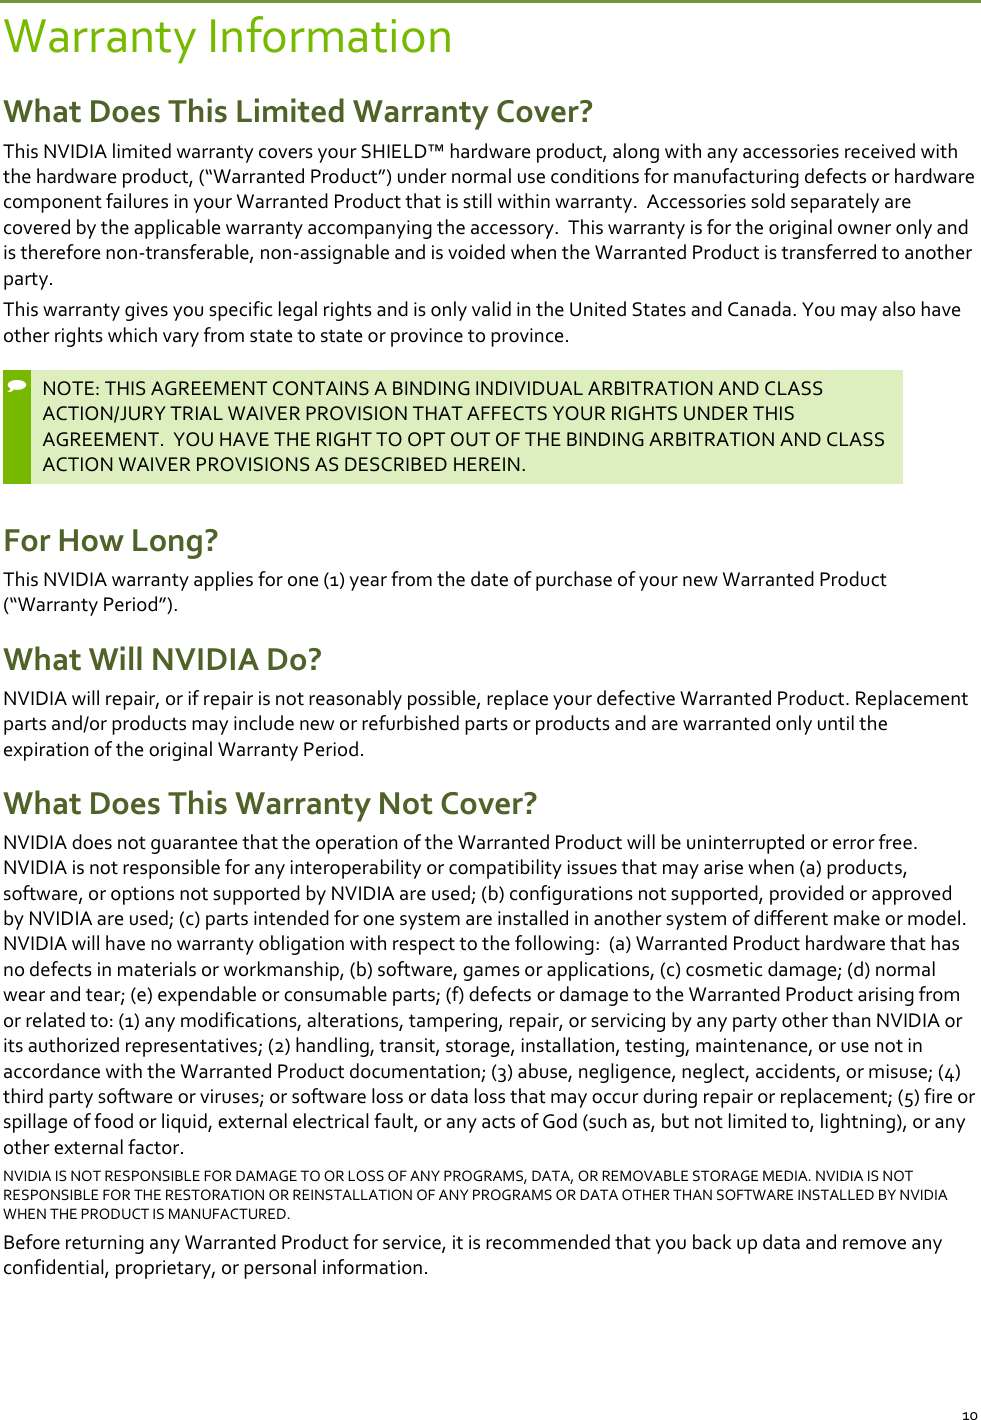 10 Warranty Information What Does This Limited Warranty Cover? This NVIDIA limited warranty covers your SHIELD™ hardware product, along with any accessories received with the hardware product, (“Warranted Product”) under normal use conditions for manufacturing defects or hardware component failures in your Warranted Product that is still within warranty.  Accessories sold separately are covered by the applicable warranty accompanying the accessory.  This warranty is for the original owner only and is therefore non-transferable, non-assignable and is voided when the Warranted Product is transferred to another party.   This warranty gives you specific legal rights and is only valid in the United States and Canada. You may also have other rights which vary from state to state or province to province.  NOTE: THIS AGREEMENT CONTAINS A BINDING INDIVIDUAL ARBITRATION AND CLASS ACTION/JURY TRIAL WAIVER PROVISION THAT AFFECTS YOUR RIGHTS UNDER THIS AGREEMENT.  YOU HAVE THE RIGHT TO OPT OUT OF THE BINDING ARBITRATION AND CLASS ACTION WAIVER PROVISIONS AS DESCRIBED HEREIN.  For How Long? This NVIDIA warranty applies for one (1) year from the date of purchase of your new Warranted Product (“Warranty Period”).  What Will NVIDIA Do? NVIDIA will repair, or if repair is not reasonably possible, replace your defective Warranted Product. Replacement parts and/or products may include new or refurbished parts or products and are warranted only until the expiration of the original Warranty Period.  What Does This Warranty Not Cover? NVIDIA does not guarantee that the operation of the Warranted Product will be uninterrupted or error free. NVIDIA is not responsible for any interoperability or compatibility issues that may arise when (a) products, software, or options not supported by NVIDIA are used; (b) configurations not supported, provided or approved by NVIDIA are used; (c) parts intended for one system are installed in another system of different make or model.  NVIDIA will have no warranty obligation with respect to the following:  (a) Warranted Product hardware that has no defects in materials or workmanship, (b) software, games or applications, (c) cosmetic damage; (d) normal wear and tear; (e) expendable or consumable parts; (f) defects or damage to the Warranted Product arising from or related to: (1) any modifications, alterations, tampering, repair, or servicing by any party other than NVIDIA or its authorized representatives; (2) handling, transit, storage, installation, testing, maintenance, or use not in accordance with the Warranted Product documentation; (3) abuse, negligence, neglect, accidents, or misuse; (4) third party software or viruses; or software loss or data loss that may occur during repair or replacement; (5) fire or spillage of food or liquid, external electrical fault, or any acts of God (such as, but not limited to, lightning), or any other external factor. NVIDIA IS NOT RESPONSIBLE FOR DAMAGE TO OR LOSS OF ANY PROGRAMS, DATA, OR REMOVABLE STORAGE MEDIA. NVIDIA IS NOT RESPONSIBLE FOR THE RESTORATION OR REINSTALLATION OF ANY PROGRAMS OR DATA OTHER THAN SOFTWARE INSTALLED BY NVIDIA WHEN THE PRODUCT IS MANUFACTURED.  Before returning any Warranted Product for service, it is recommended that you back up data and remove any confidential, proprietary, or personal information.  